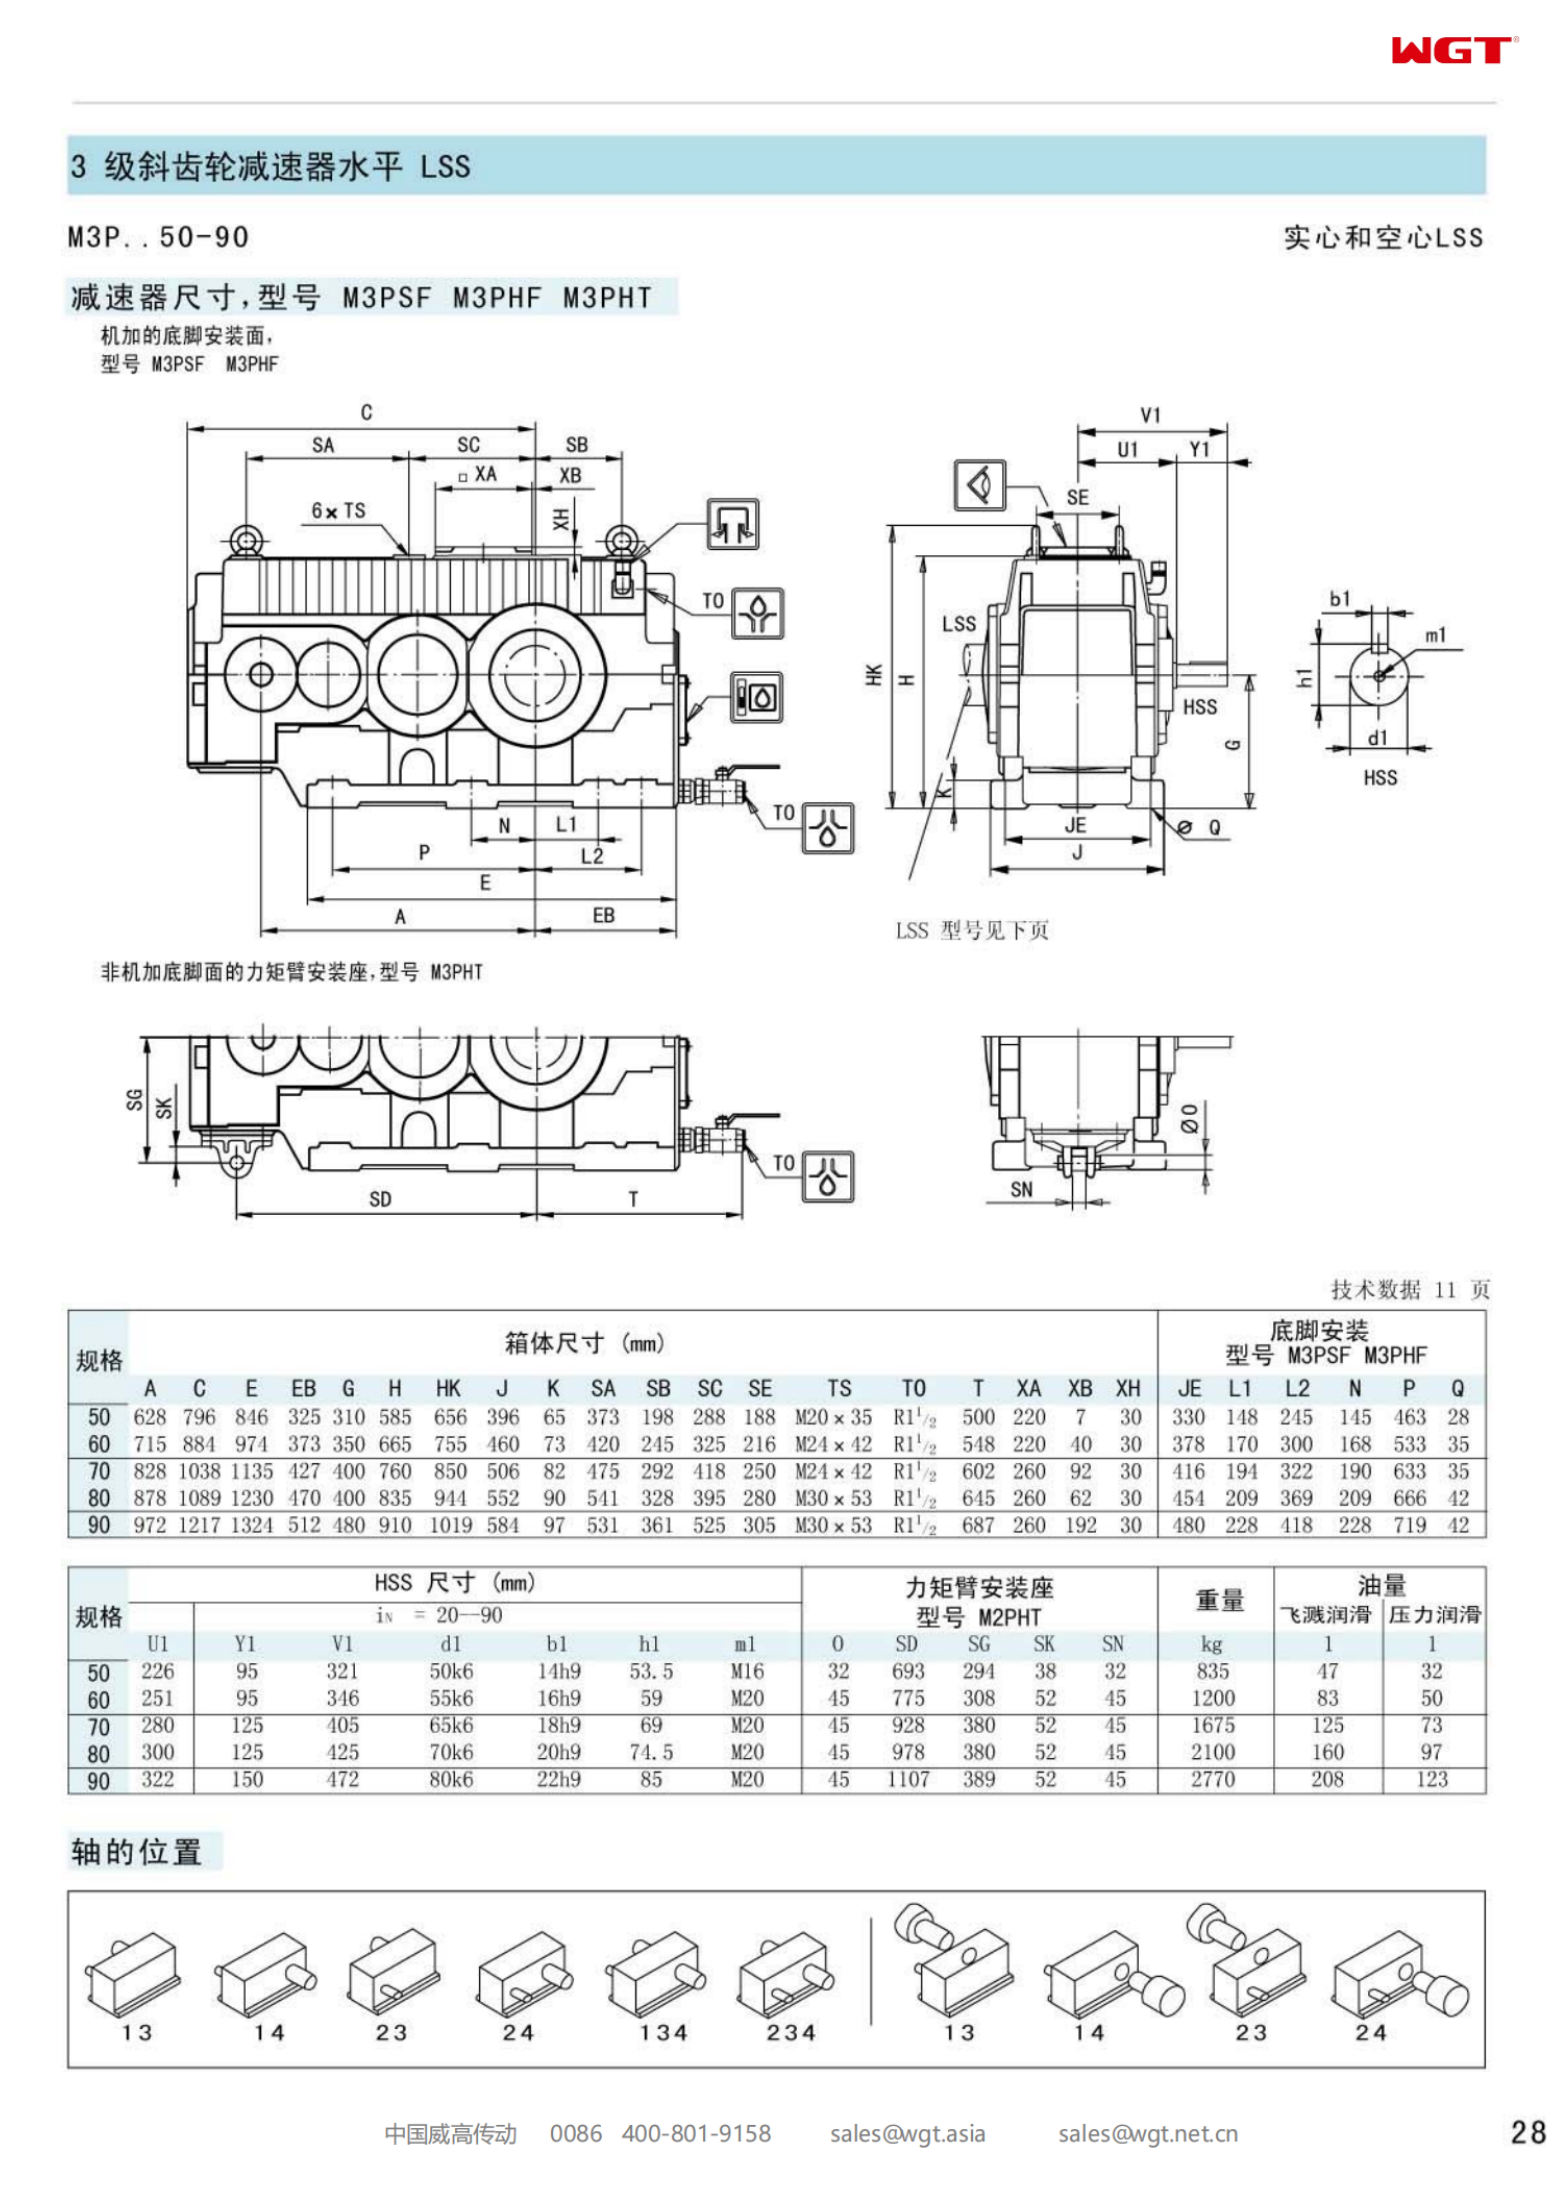 M3PHT70 Replace_SEW_M_Series Gearbox